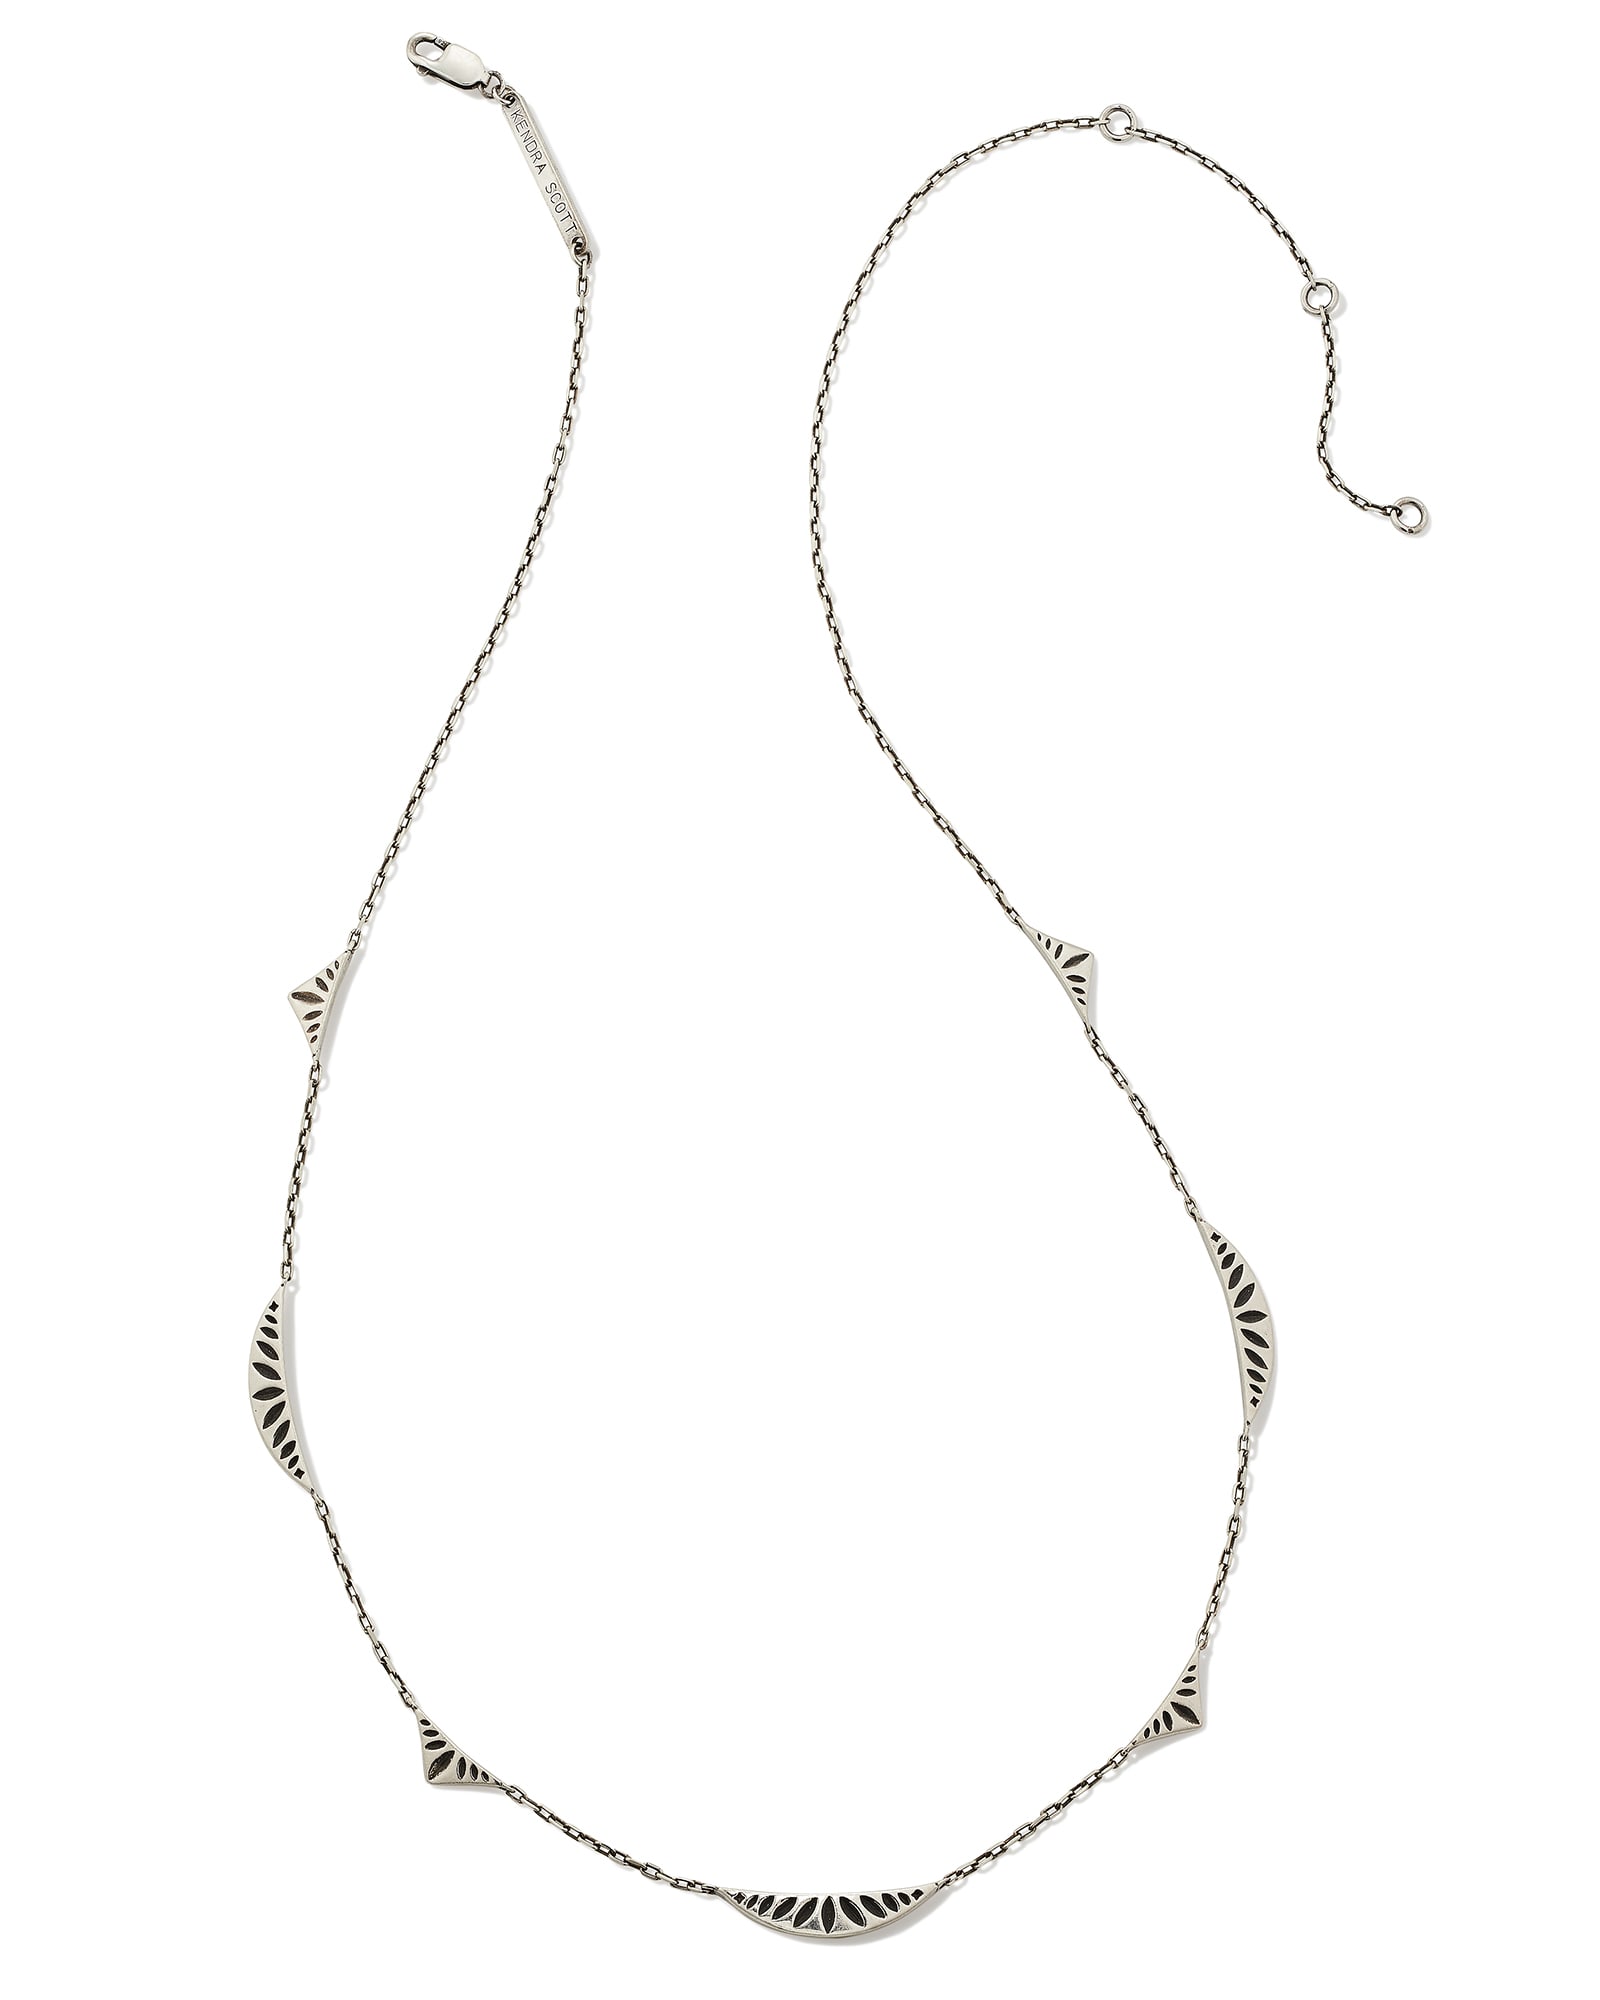 Sophee Strand Necklace in Oxidized Sterling Silver